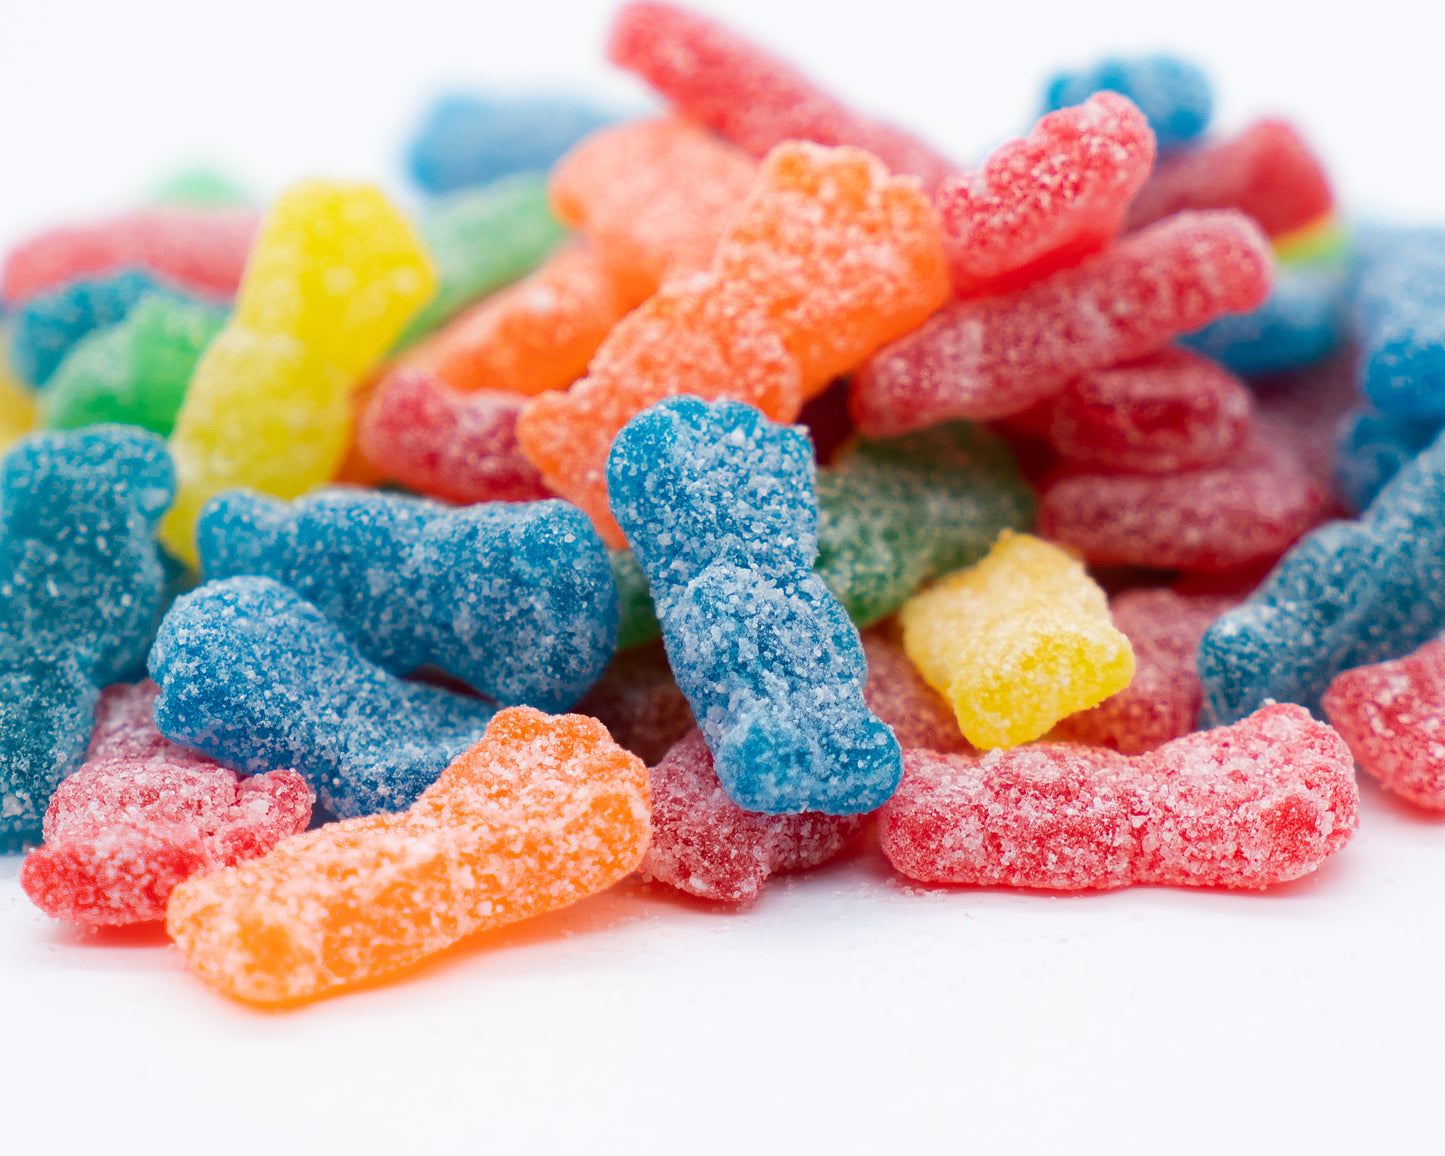 Red, Orange, Yellow, Green and Blue Sour Patch Kids Closeup